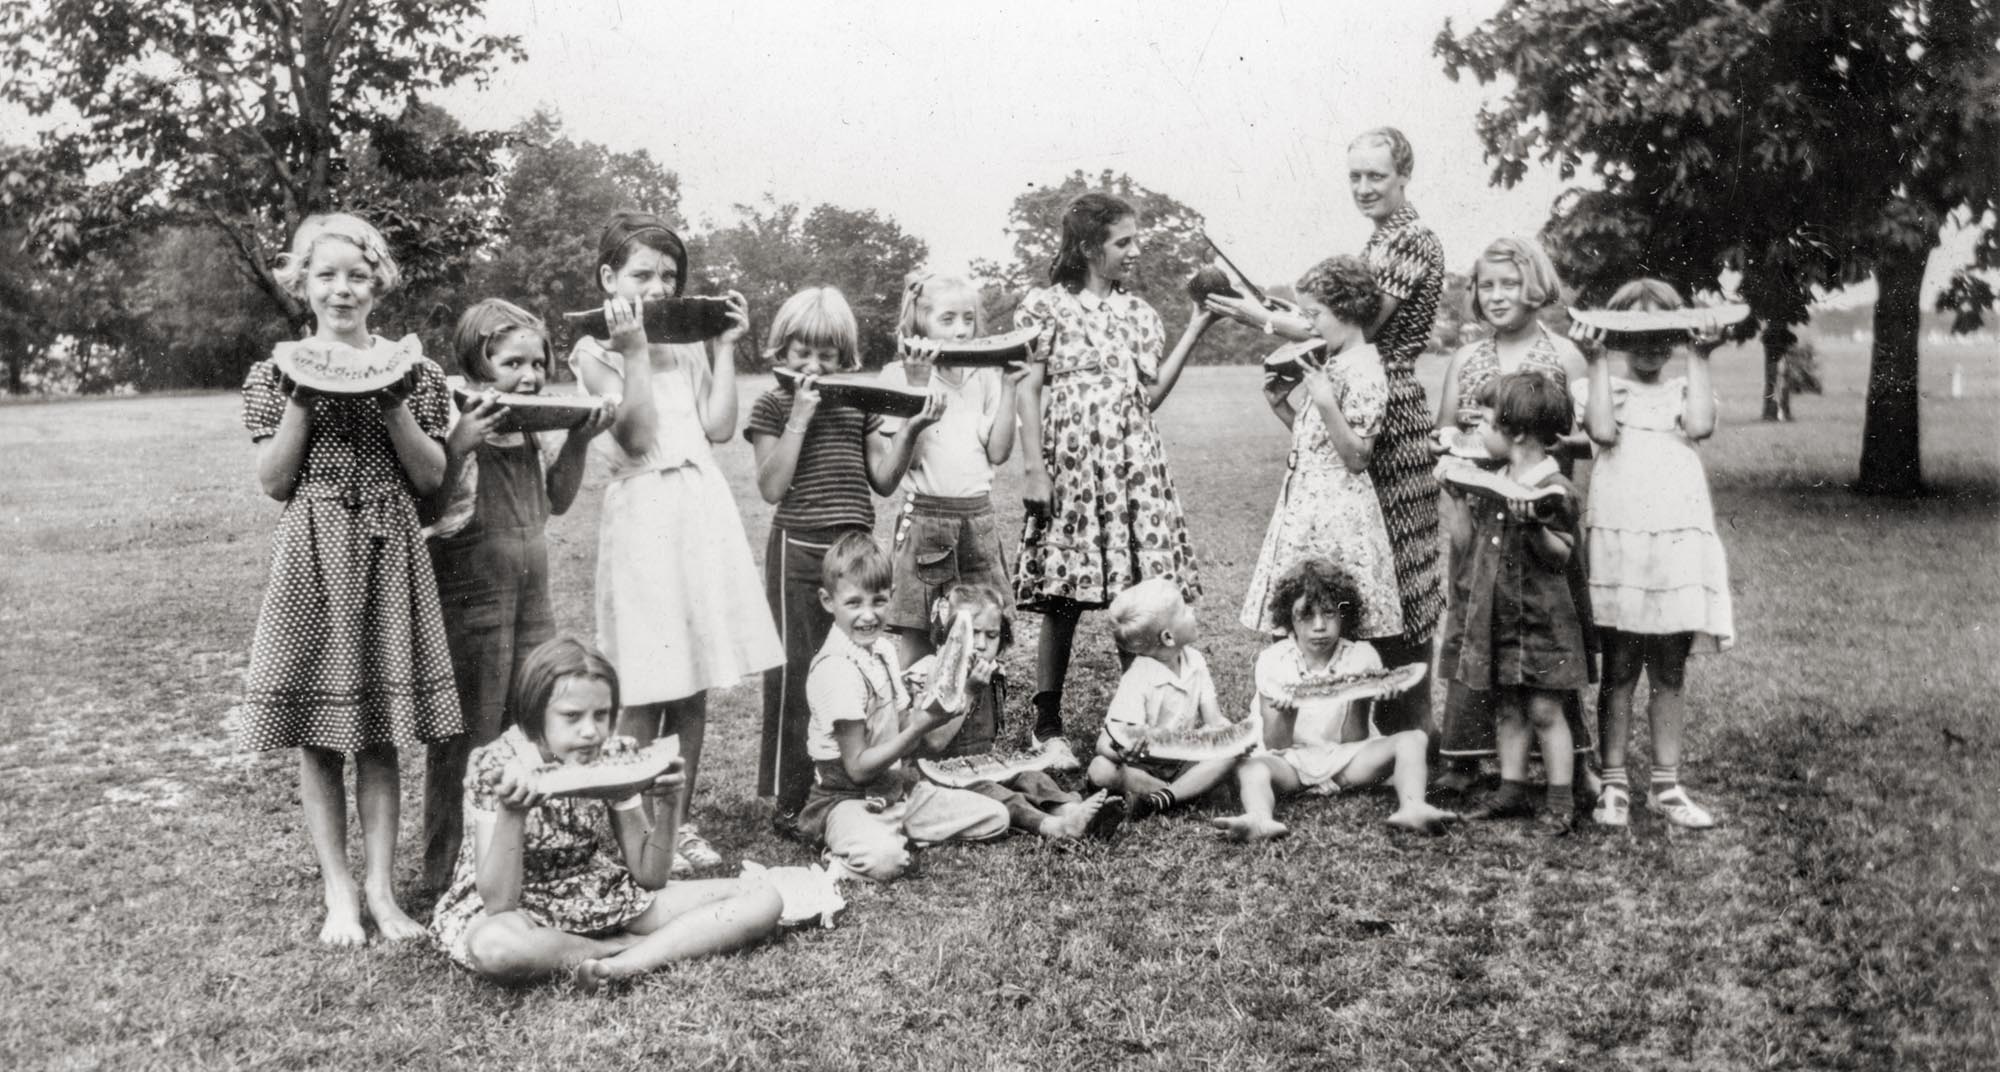 A Neighborhood House picnic in Peoria, Illinois. Circa 1930s.

The Neighborhood House Association, 1020 S. Matthew, Peoria IL, established in 1896, is dedicated to providing a Safe Haven with comprehensive services that meet the social, emotional and material needs of individuals and families from infancy to the elderly.